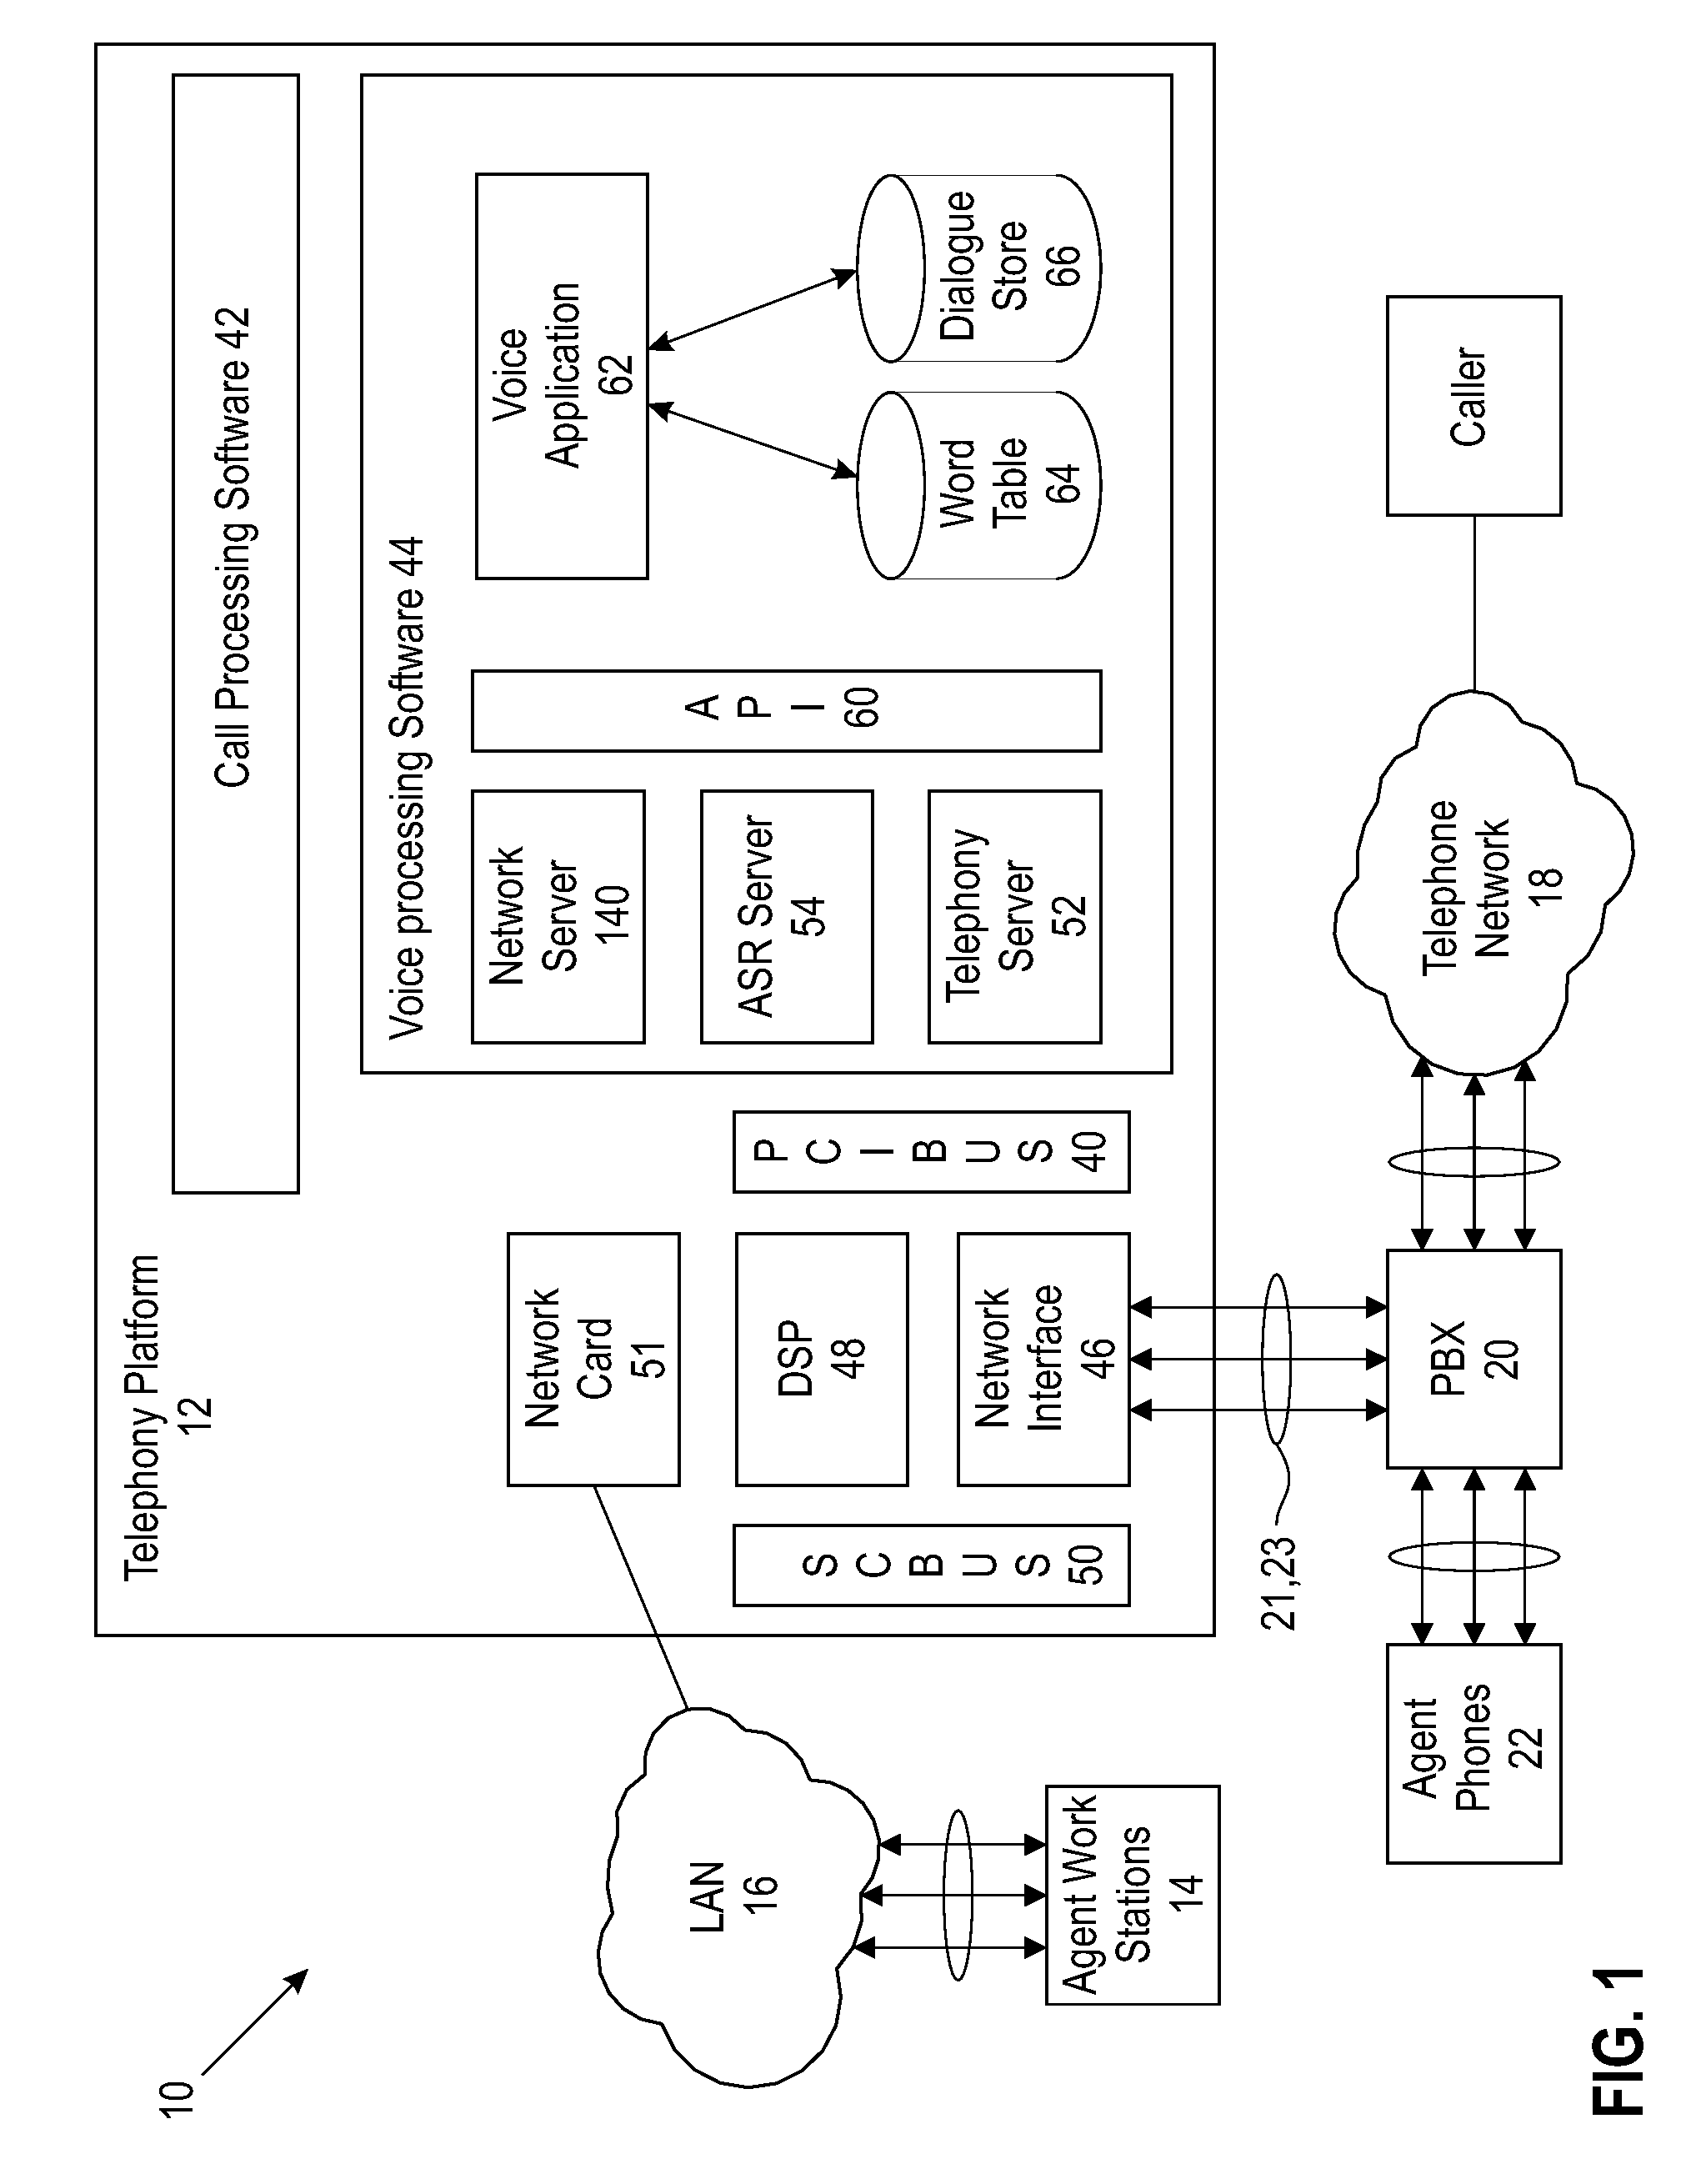 Method and System for Call Processing